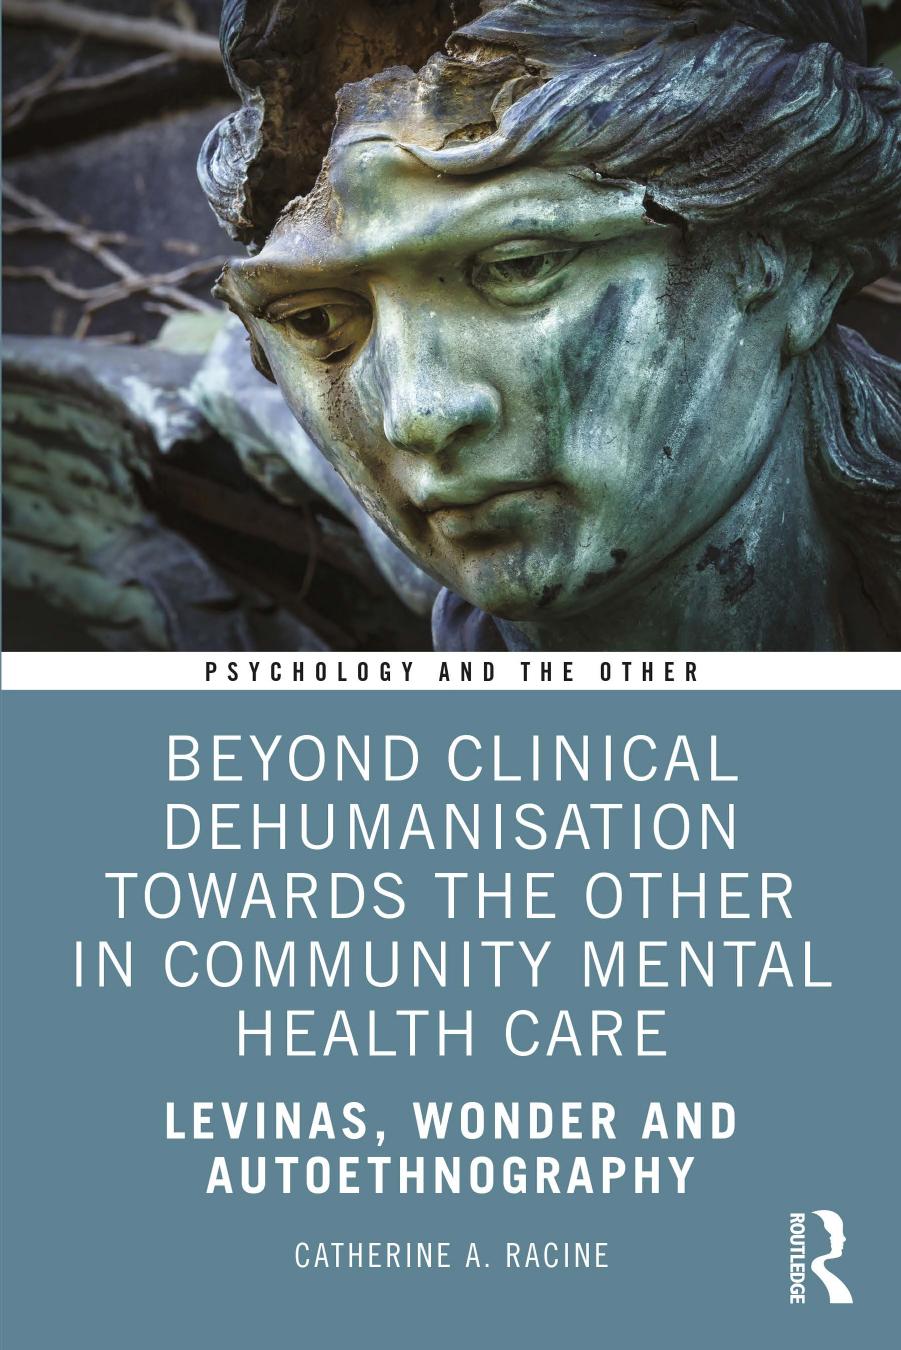 Beyond Clinical Dehumanisation towards the Other in Community Mental Health Care; Levinas, Wonder and Autoethnography